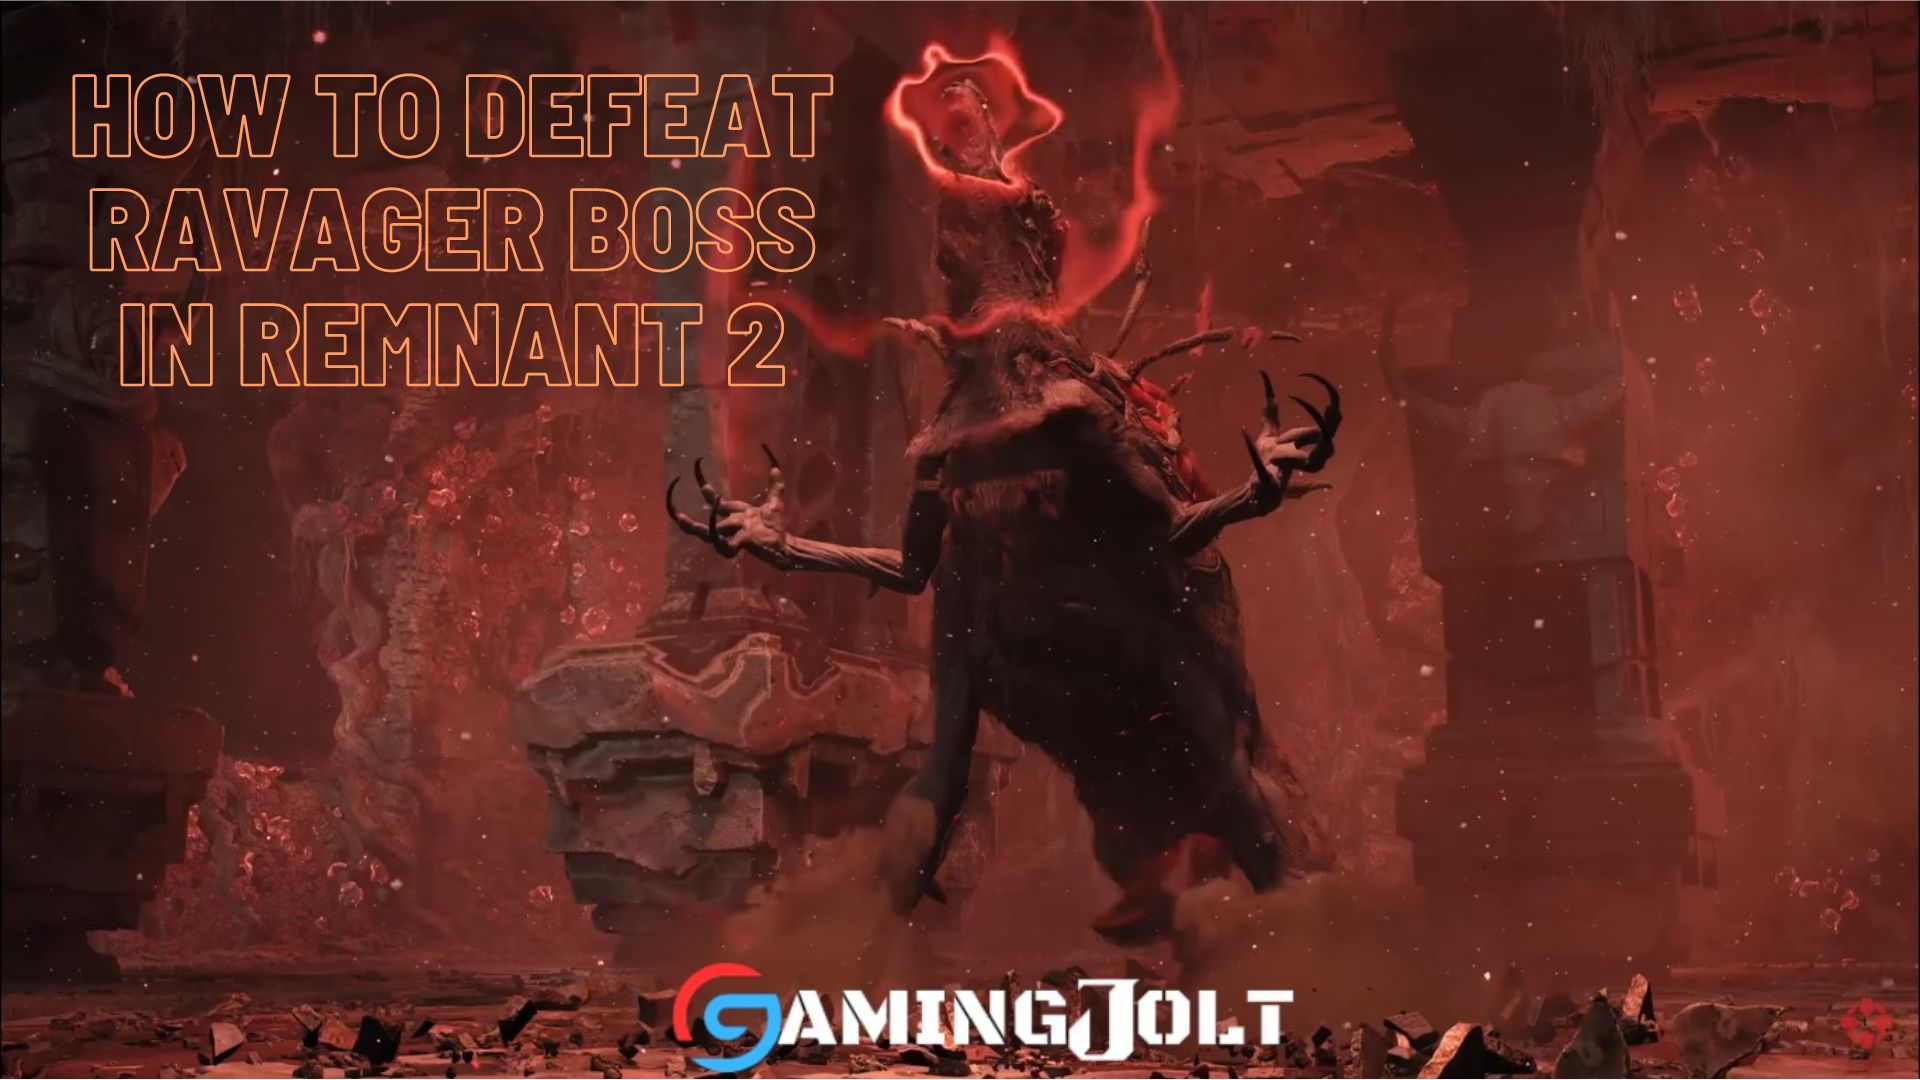 How To Defeat Ravager Boss In Remnant 2